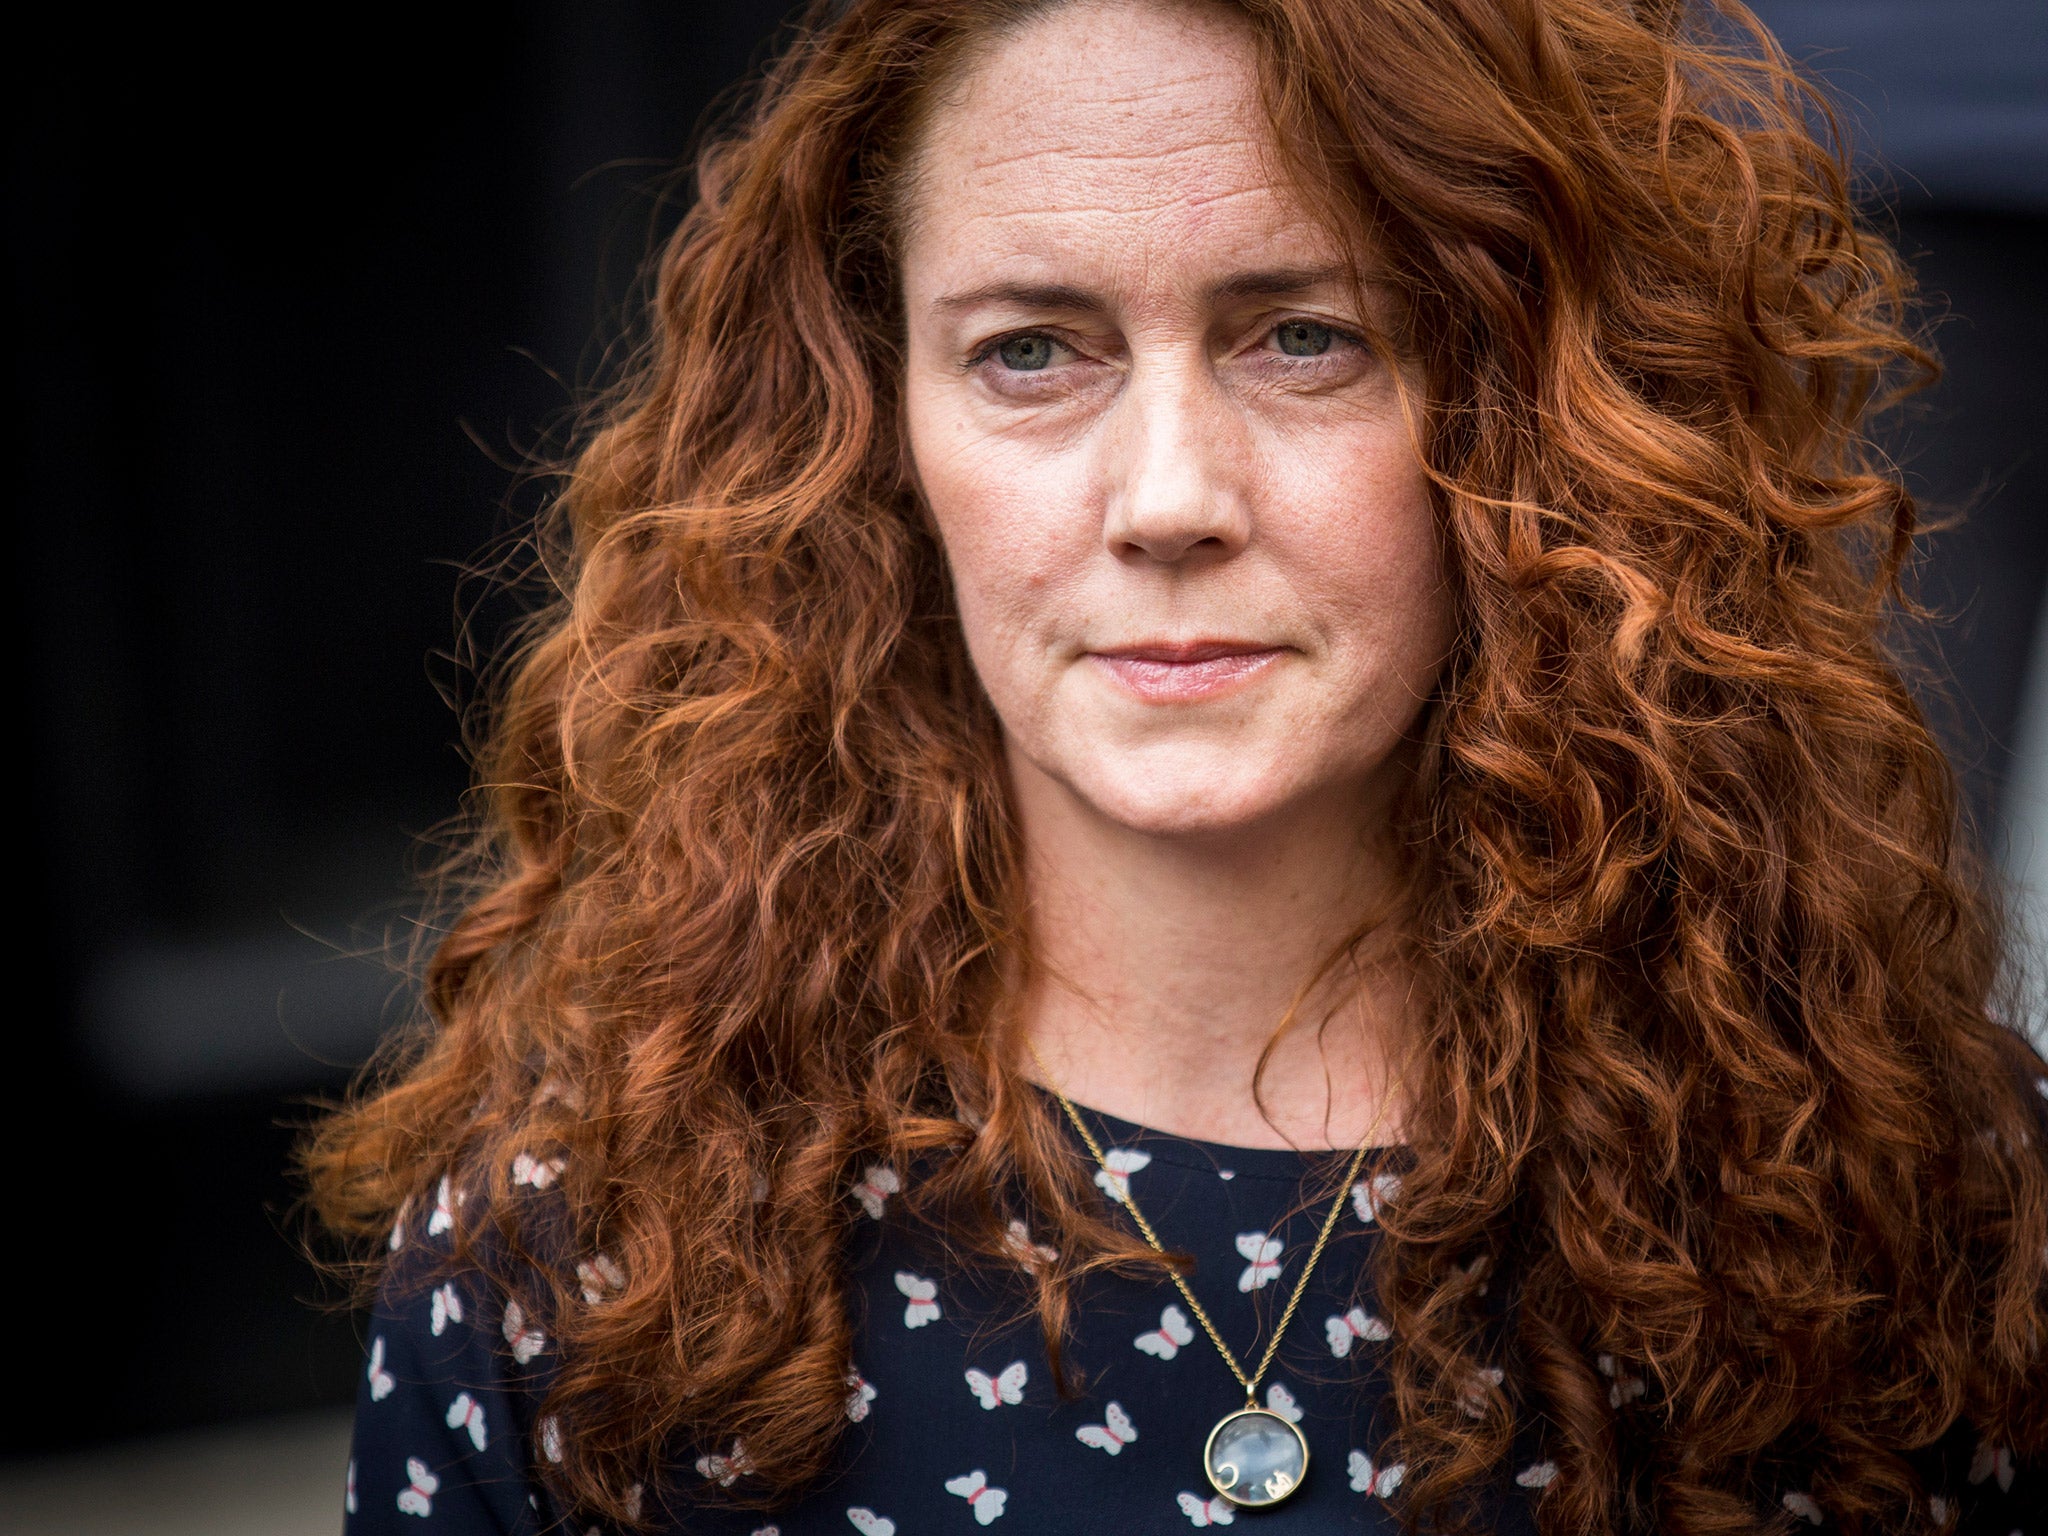 Rebekah Brooks was cleared of phone hacking after a long criminal trial, which ended in 2014